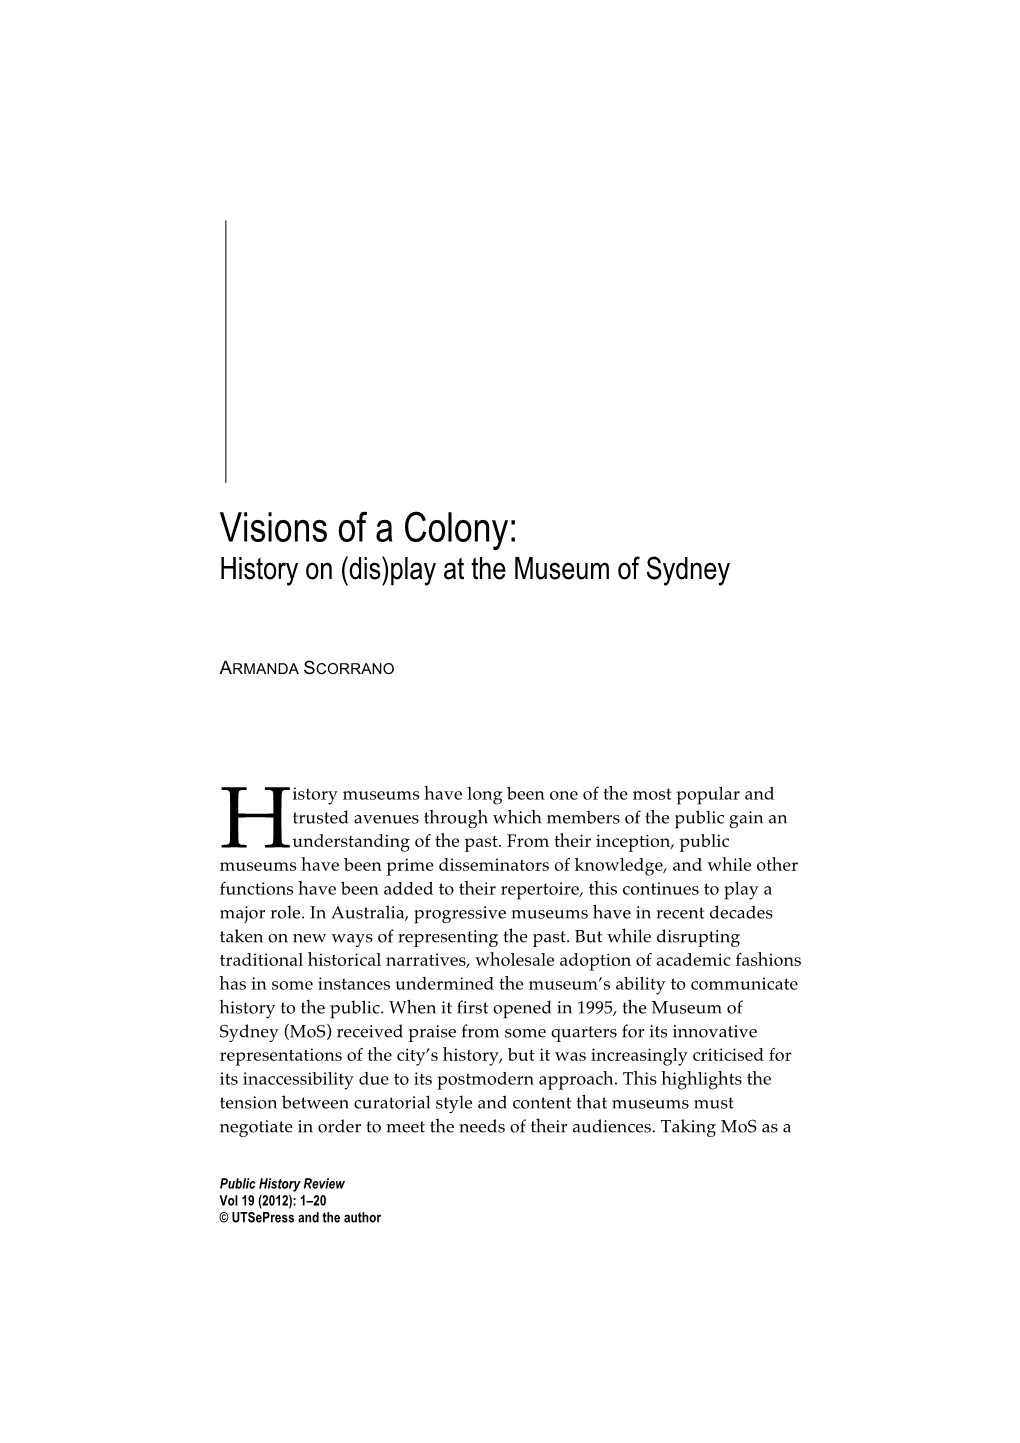 Visions of a Colony: History on (Dis)Play at the Museum of Sydney